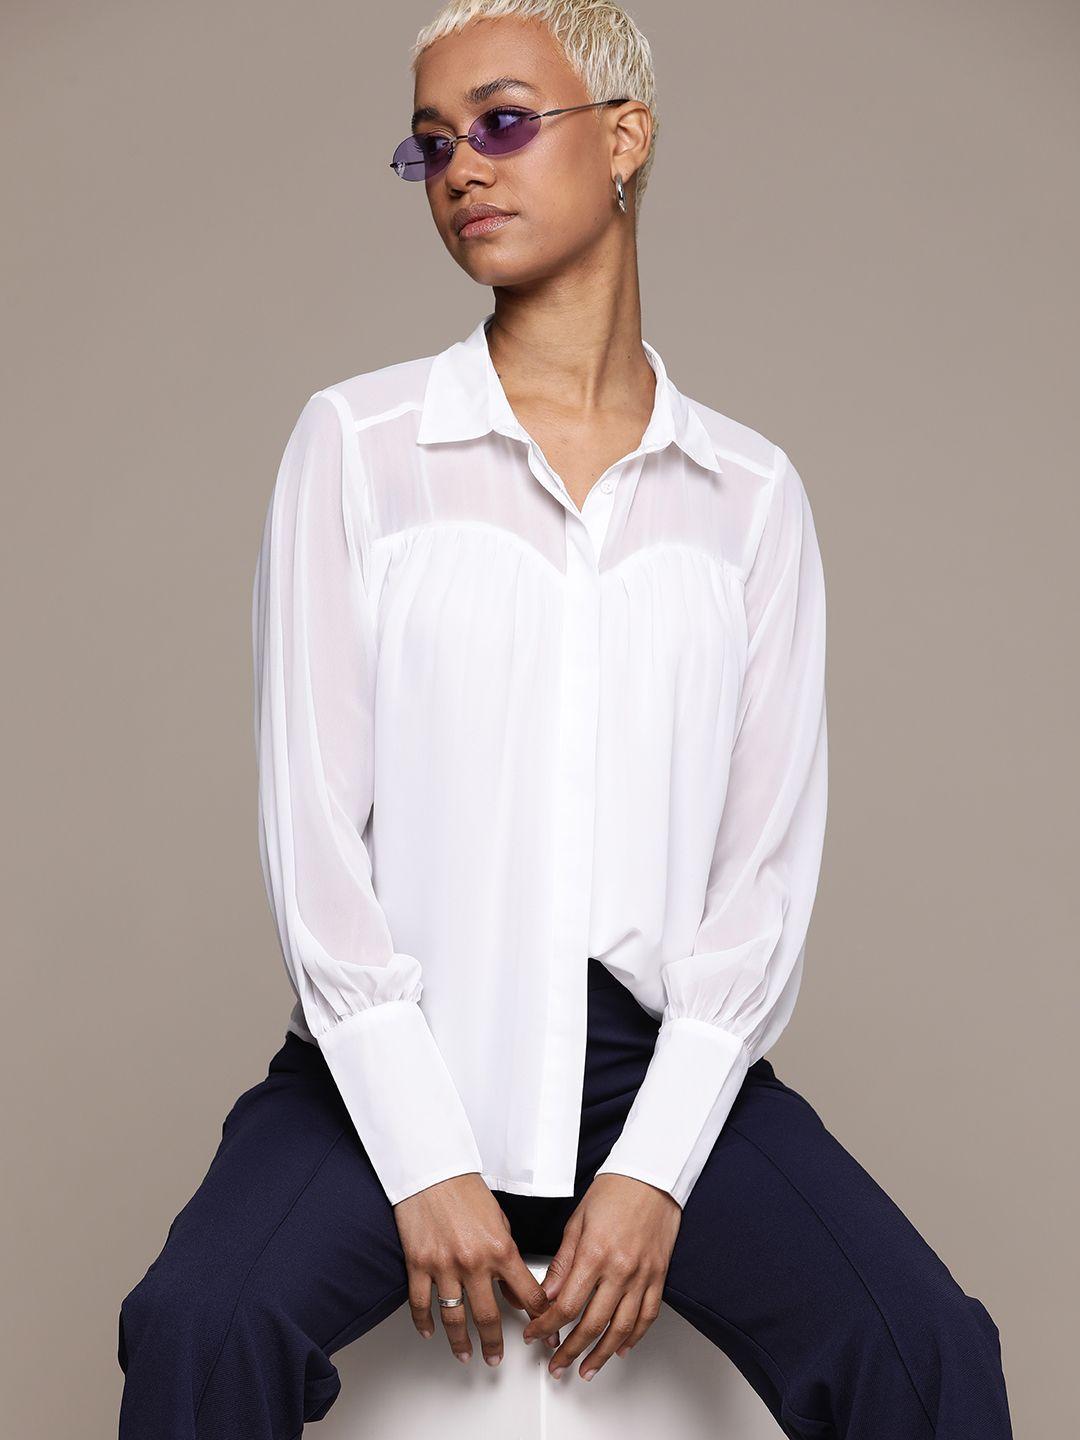 the-roadster-lifestyle-co.-semi-sheer-spread-collar-shirt